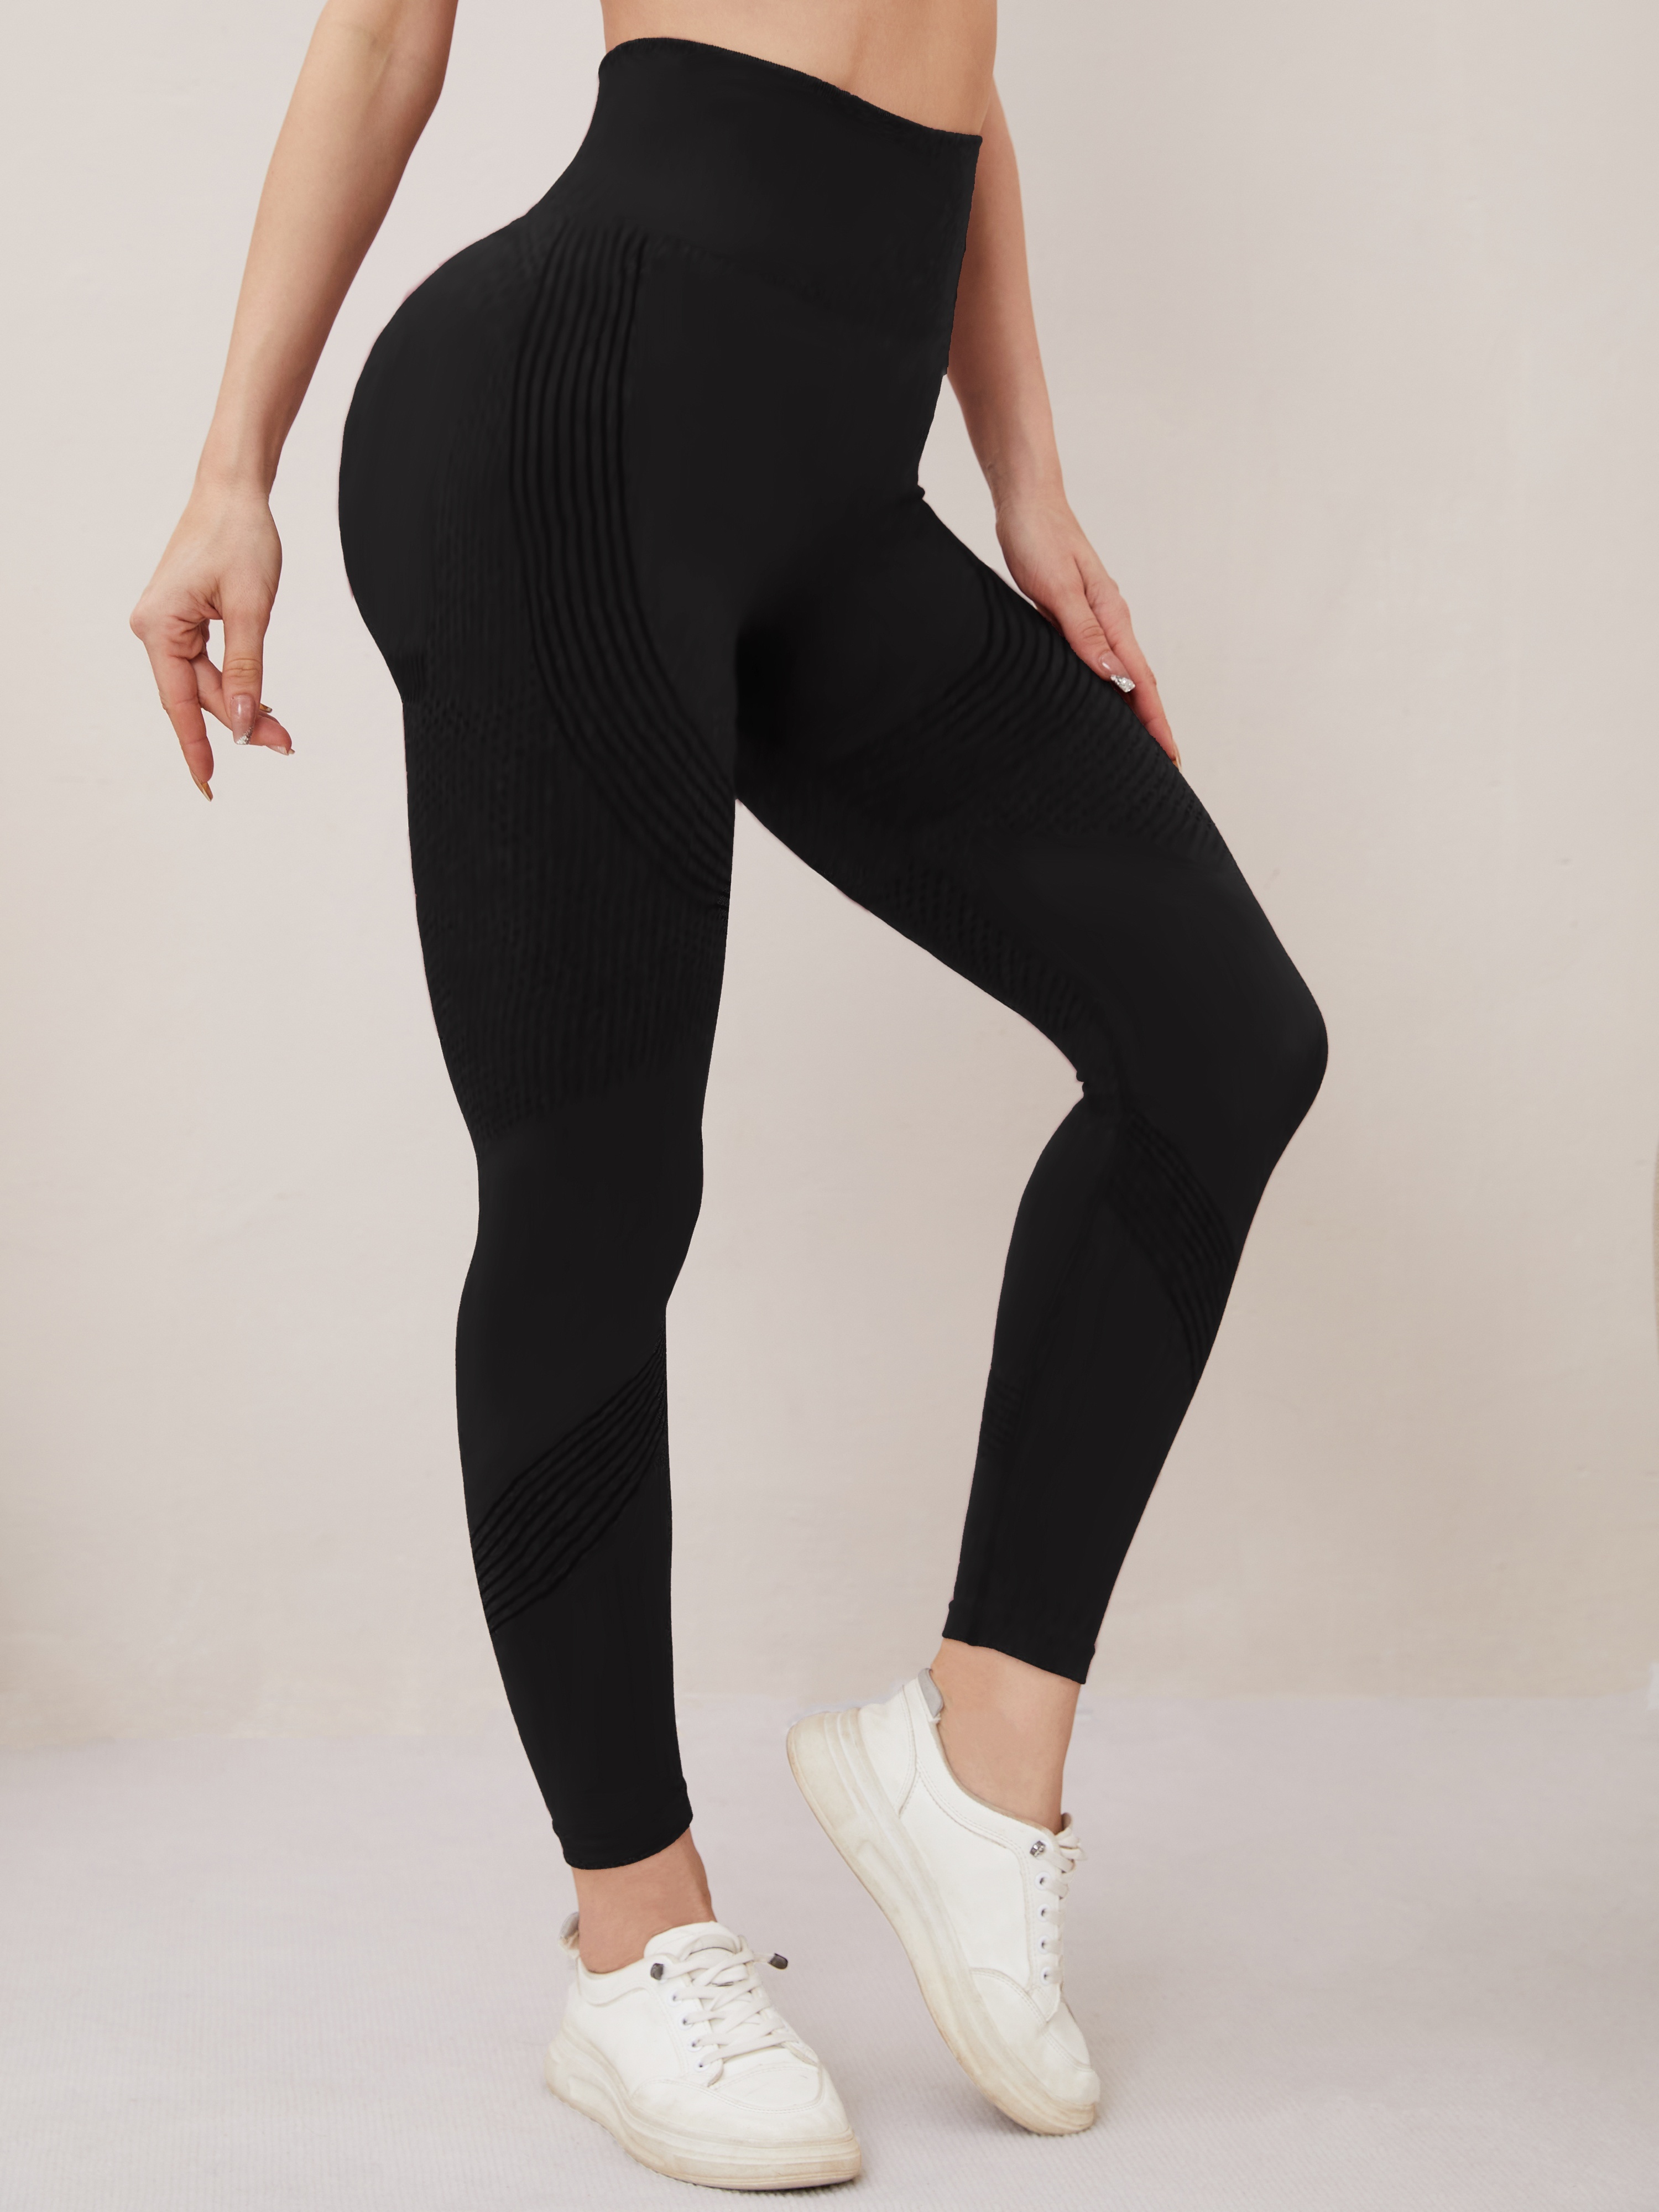 Women Athletic Shorts Tummy Control Workout Stretchy Pants High Waist  Buttock Lift Trousers Button Pocket Pants Black Small at  Women's  Clothing store